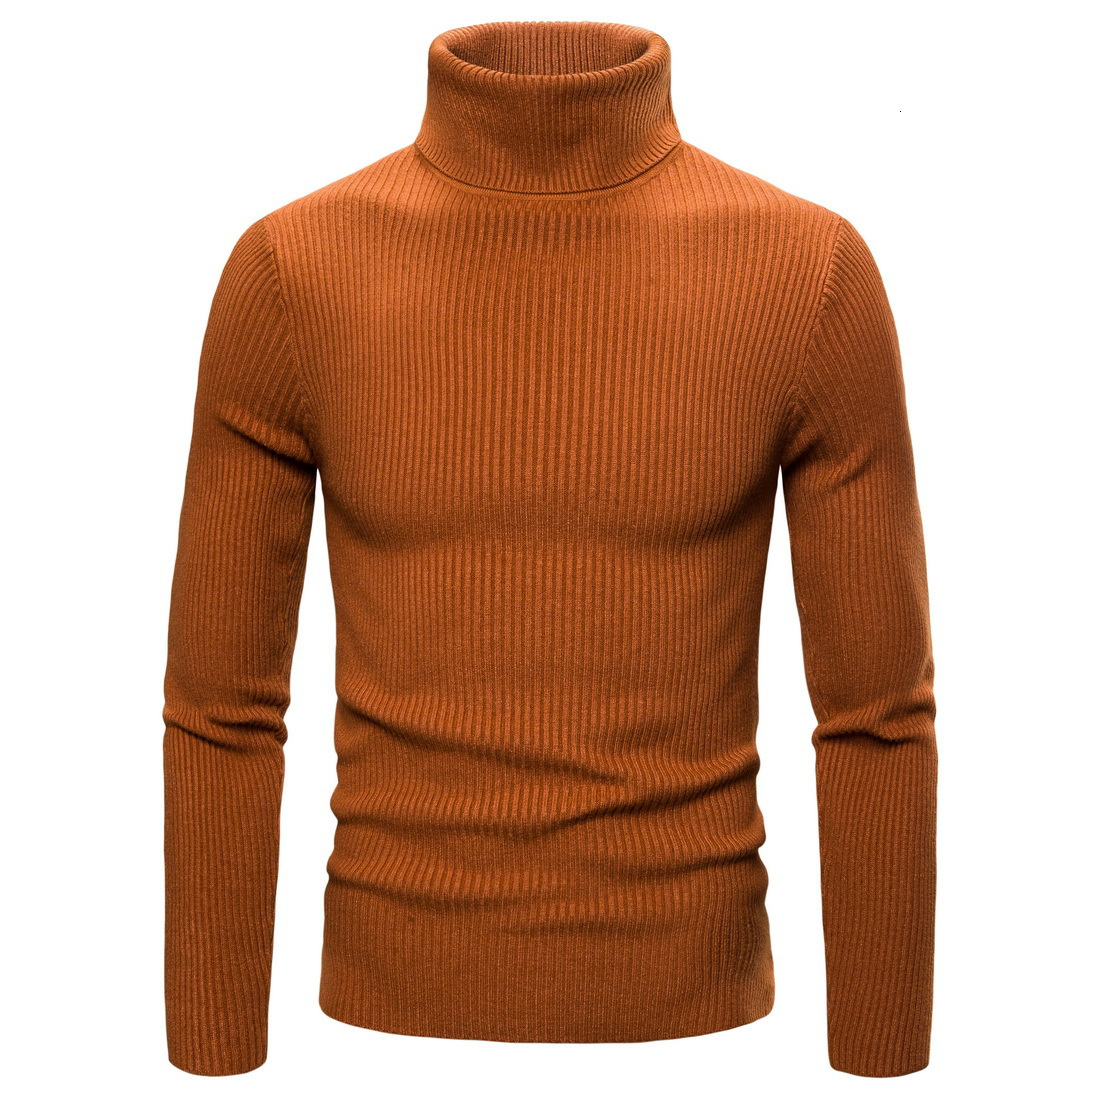 Qoo10 - wholesale 2019 New Men s Striped Turtleneck Sweaters Pullover ...